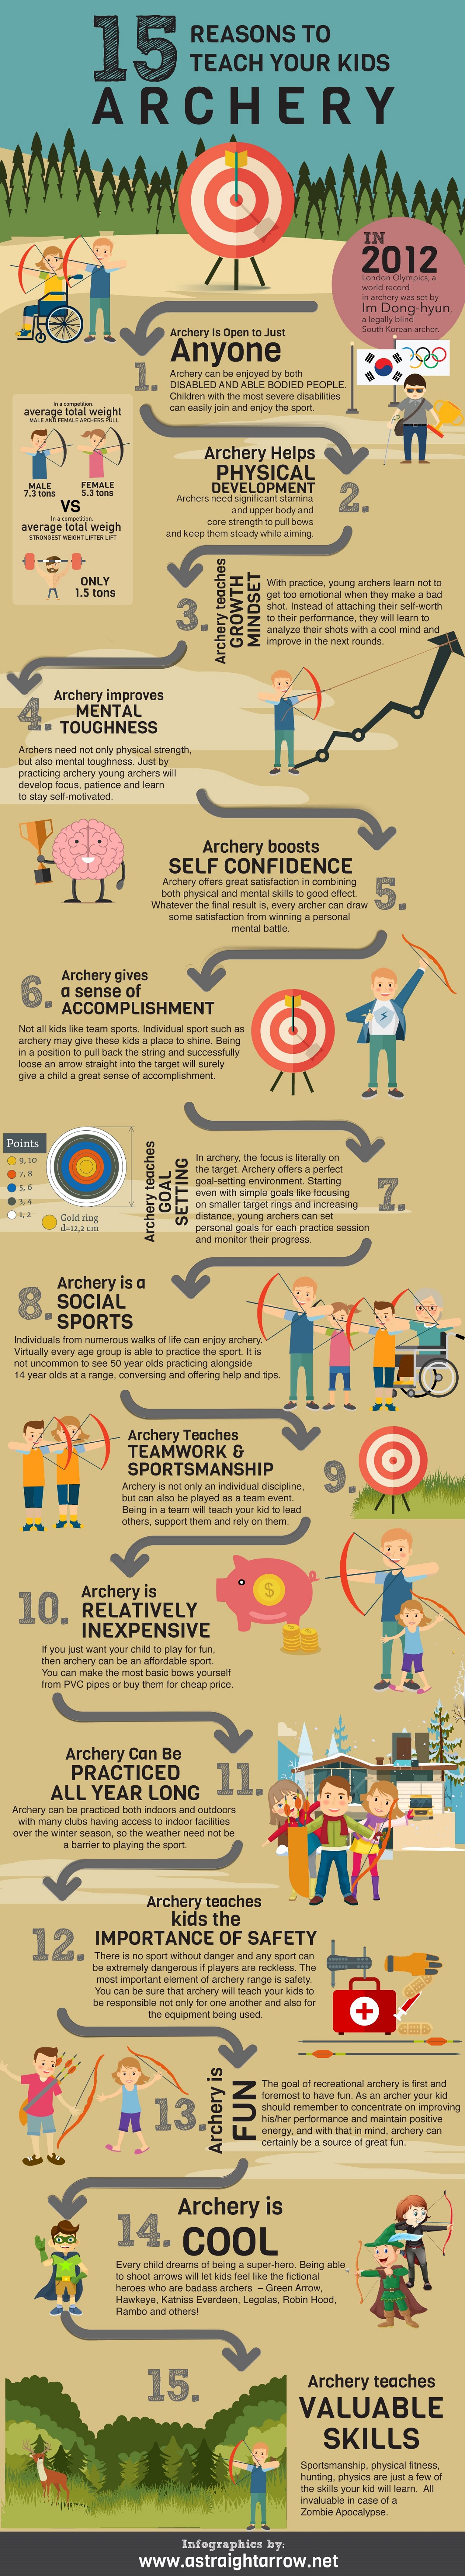 15 Reasons to Teach Your Kids Archery